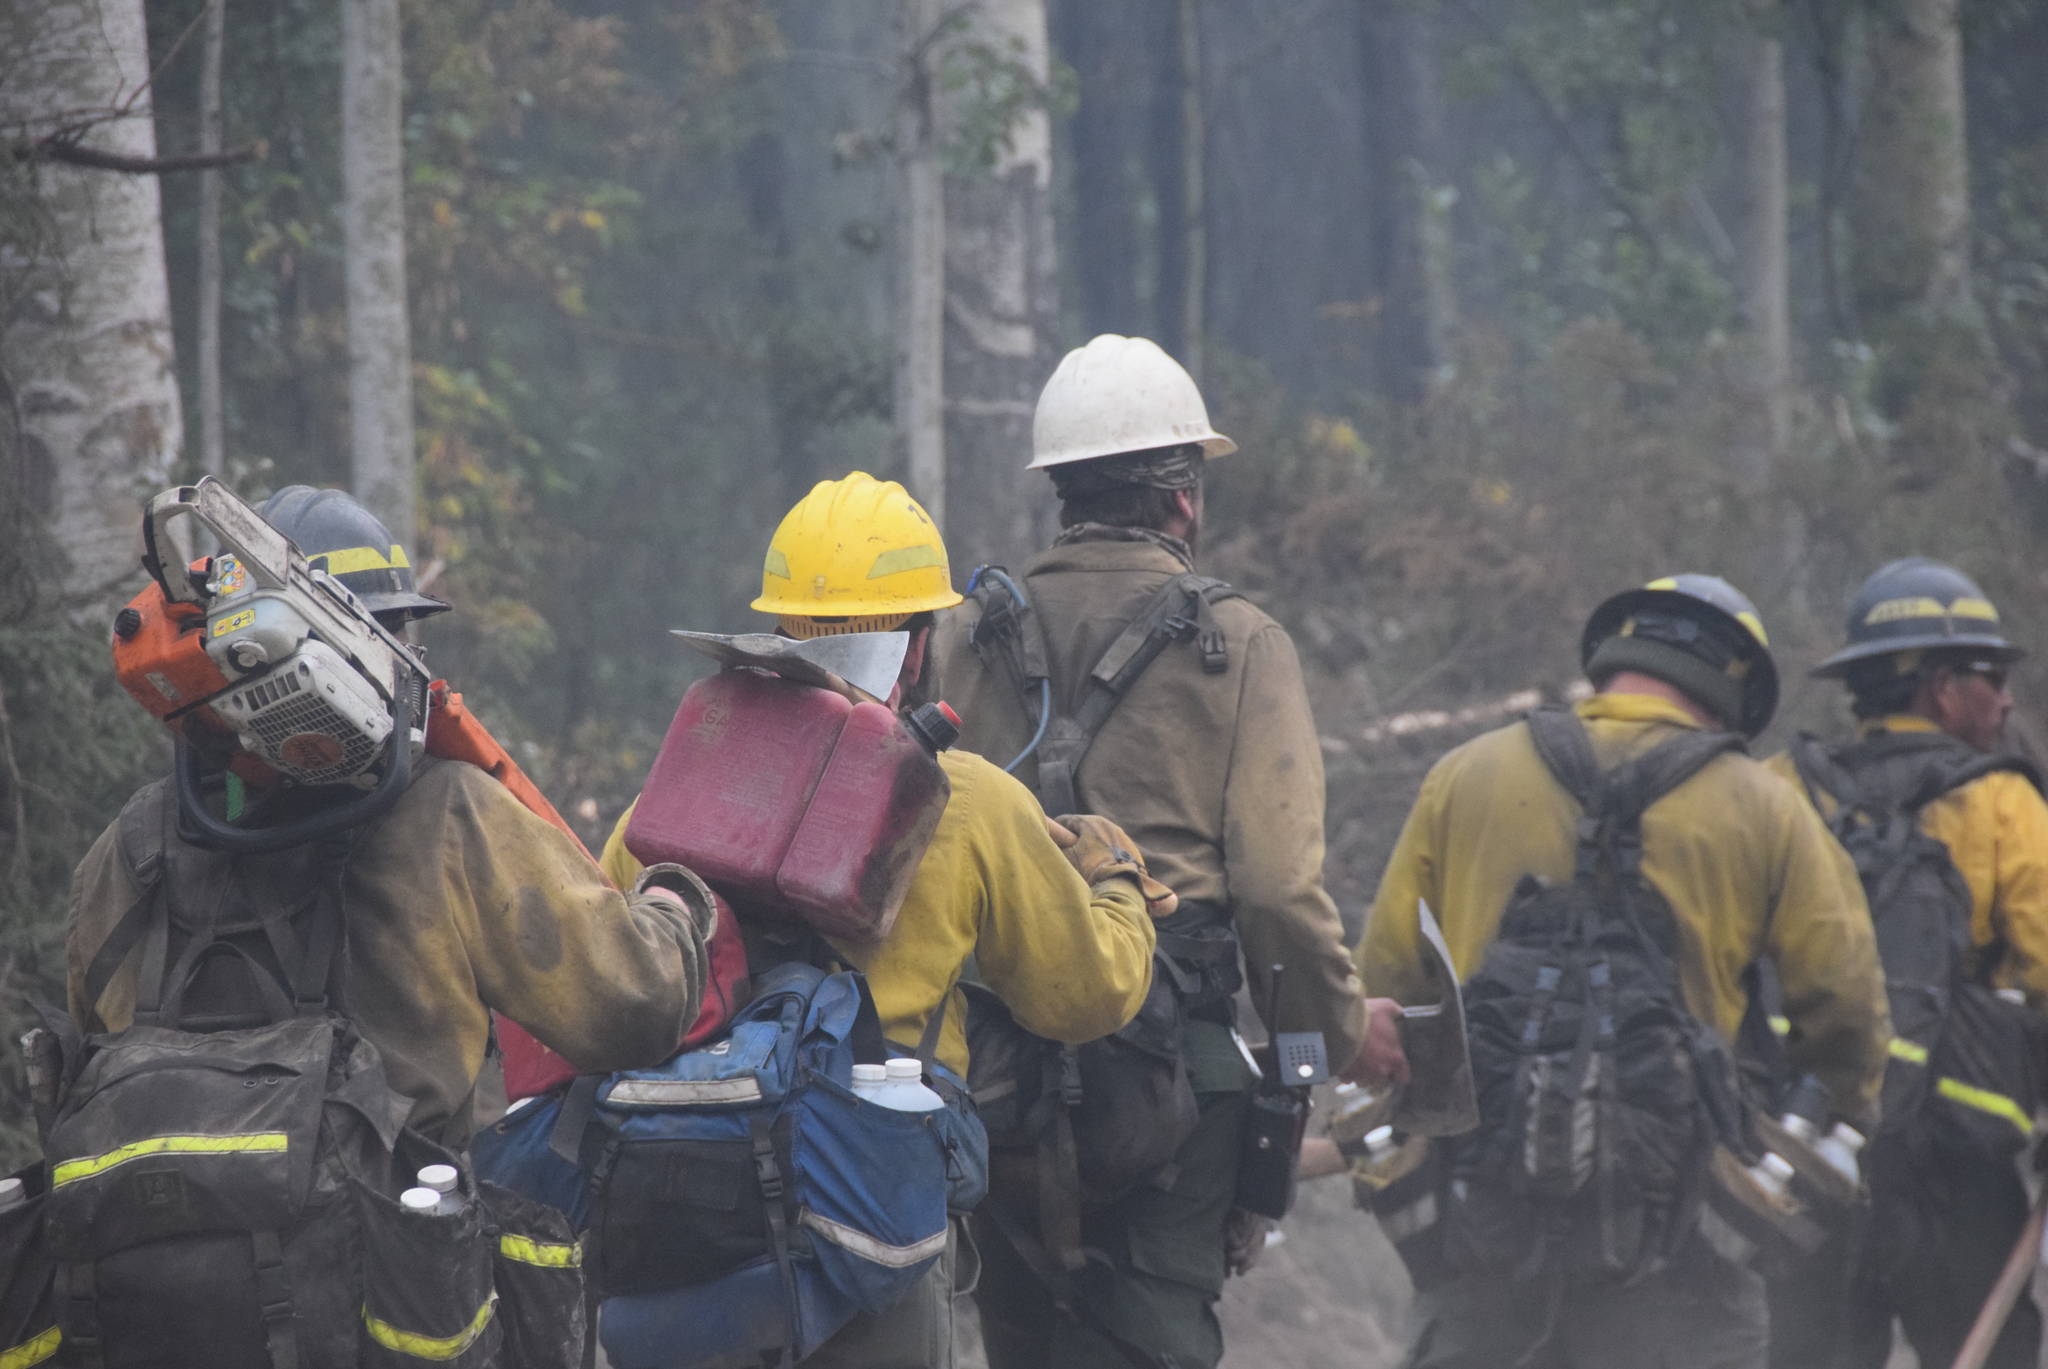 Firefighters from the Snake River Valley head out to their assignment expanding a containment line off of Skilak Lake Road southeast of Sterling, Alaska on Aug. 30, 2019. (Photo by Brian Mazurek/Peninsula Clarion)